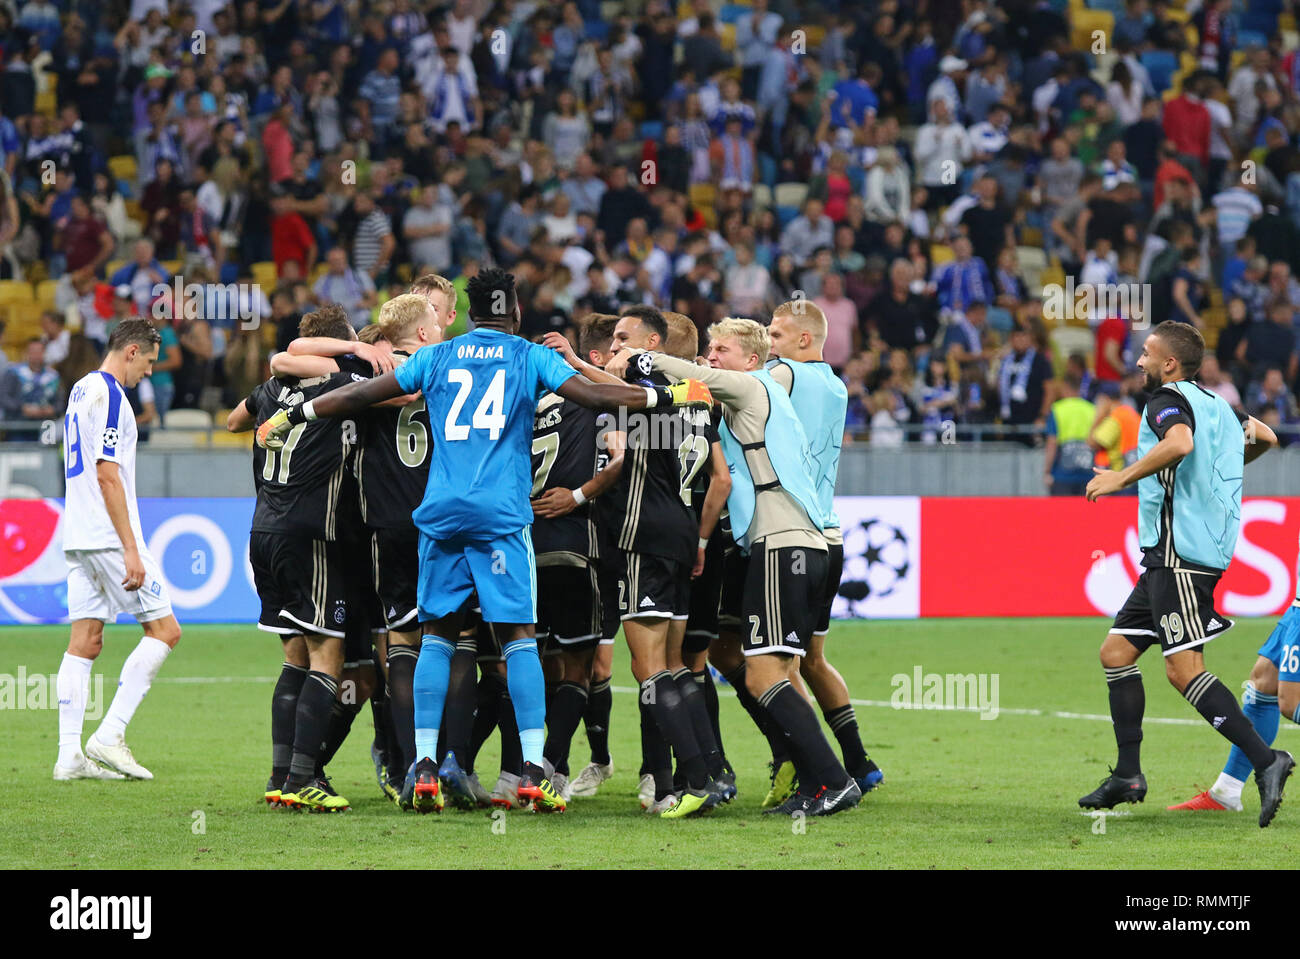 KYIV, UKRAINE - AUGUST 28, 2018: AFC Ajax players celebrate the reach of group stage after the UEFA Champions League play-off game against FC Dynamo K Stock Photo